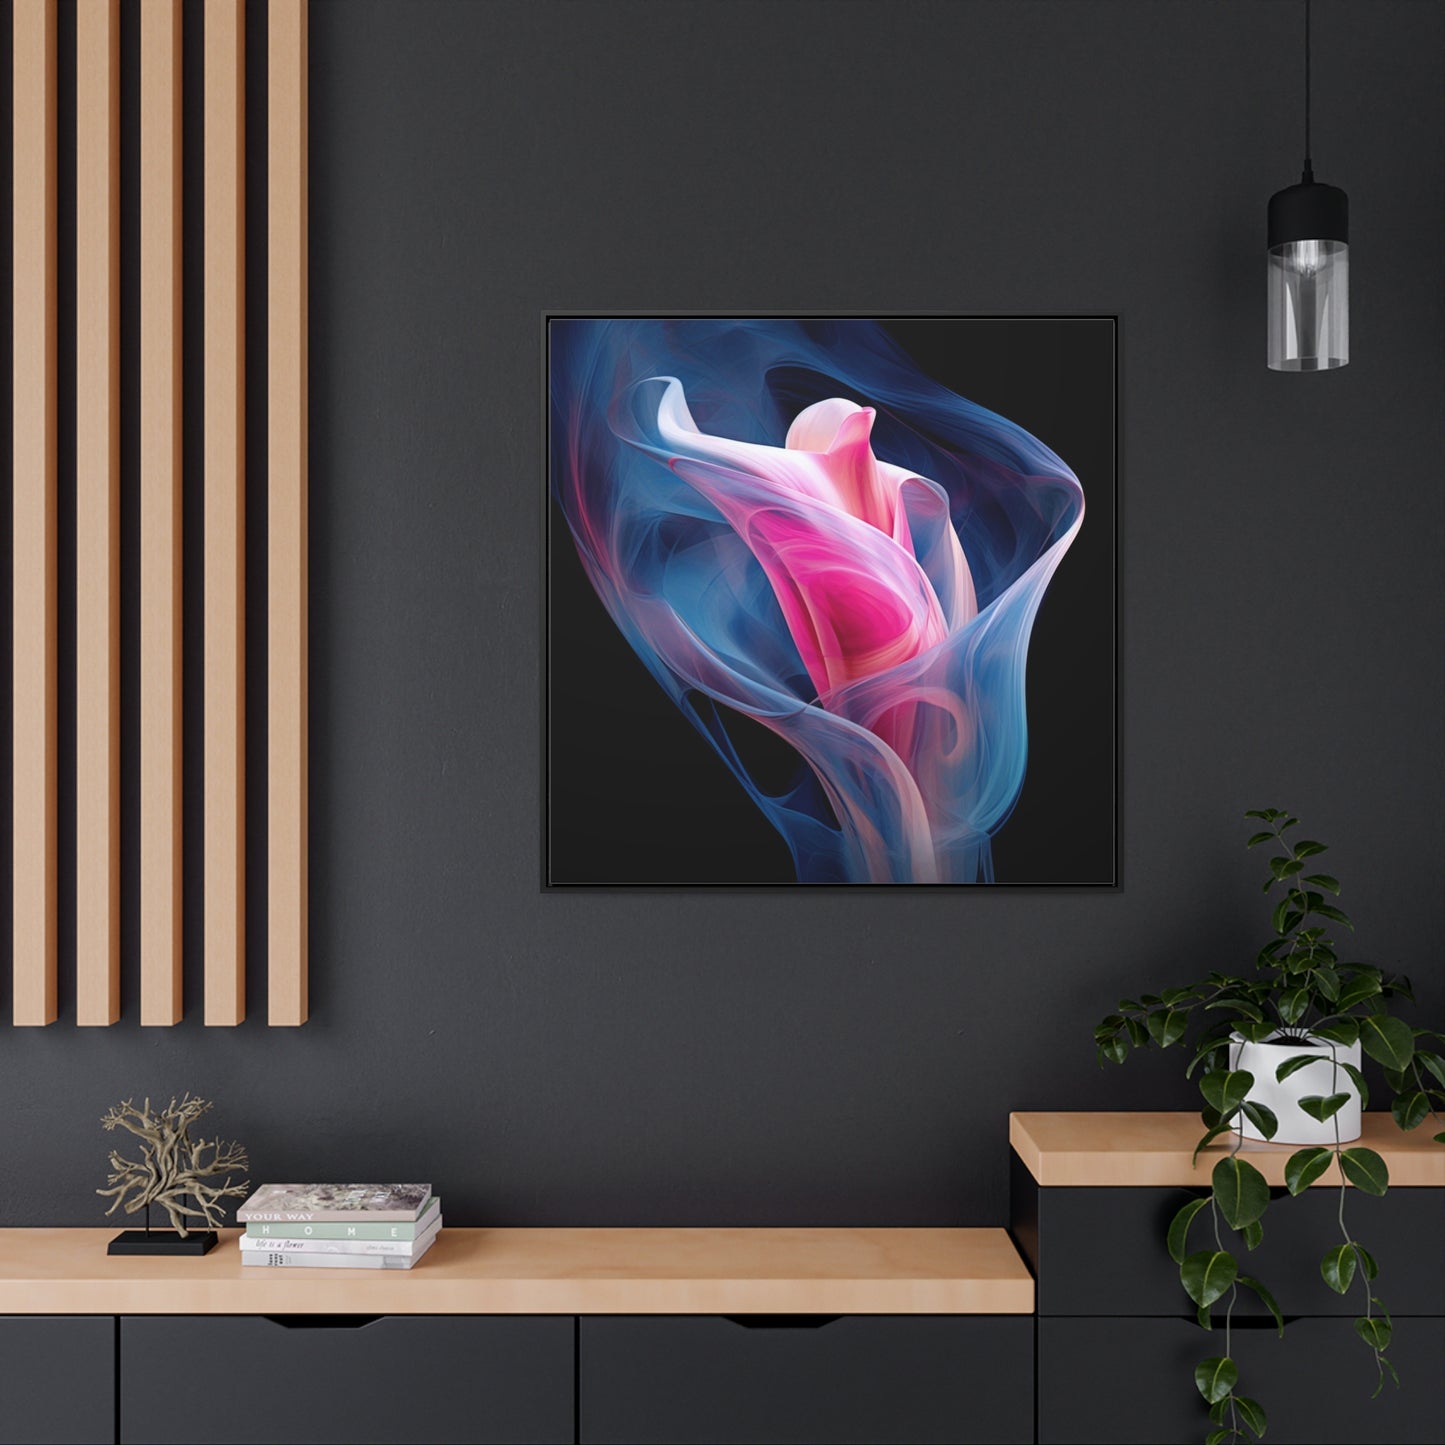 Gallery Canvas Wraps, Square Frame Pink & Blue Tulip Rose 3